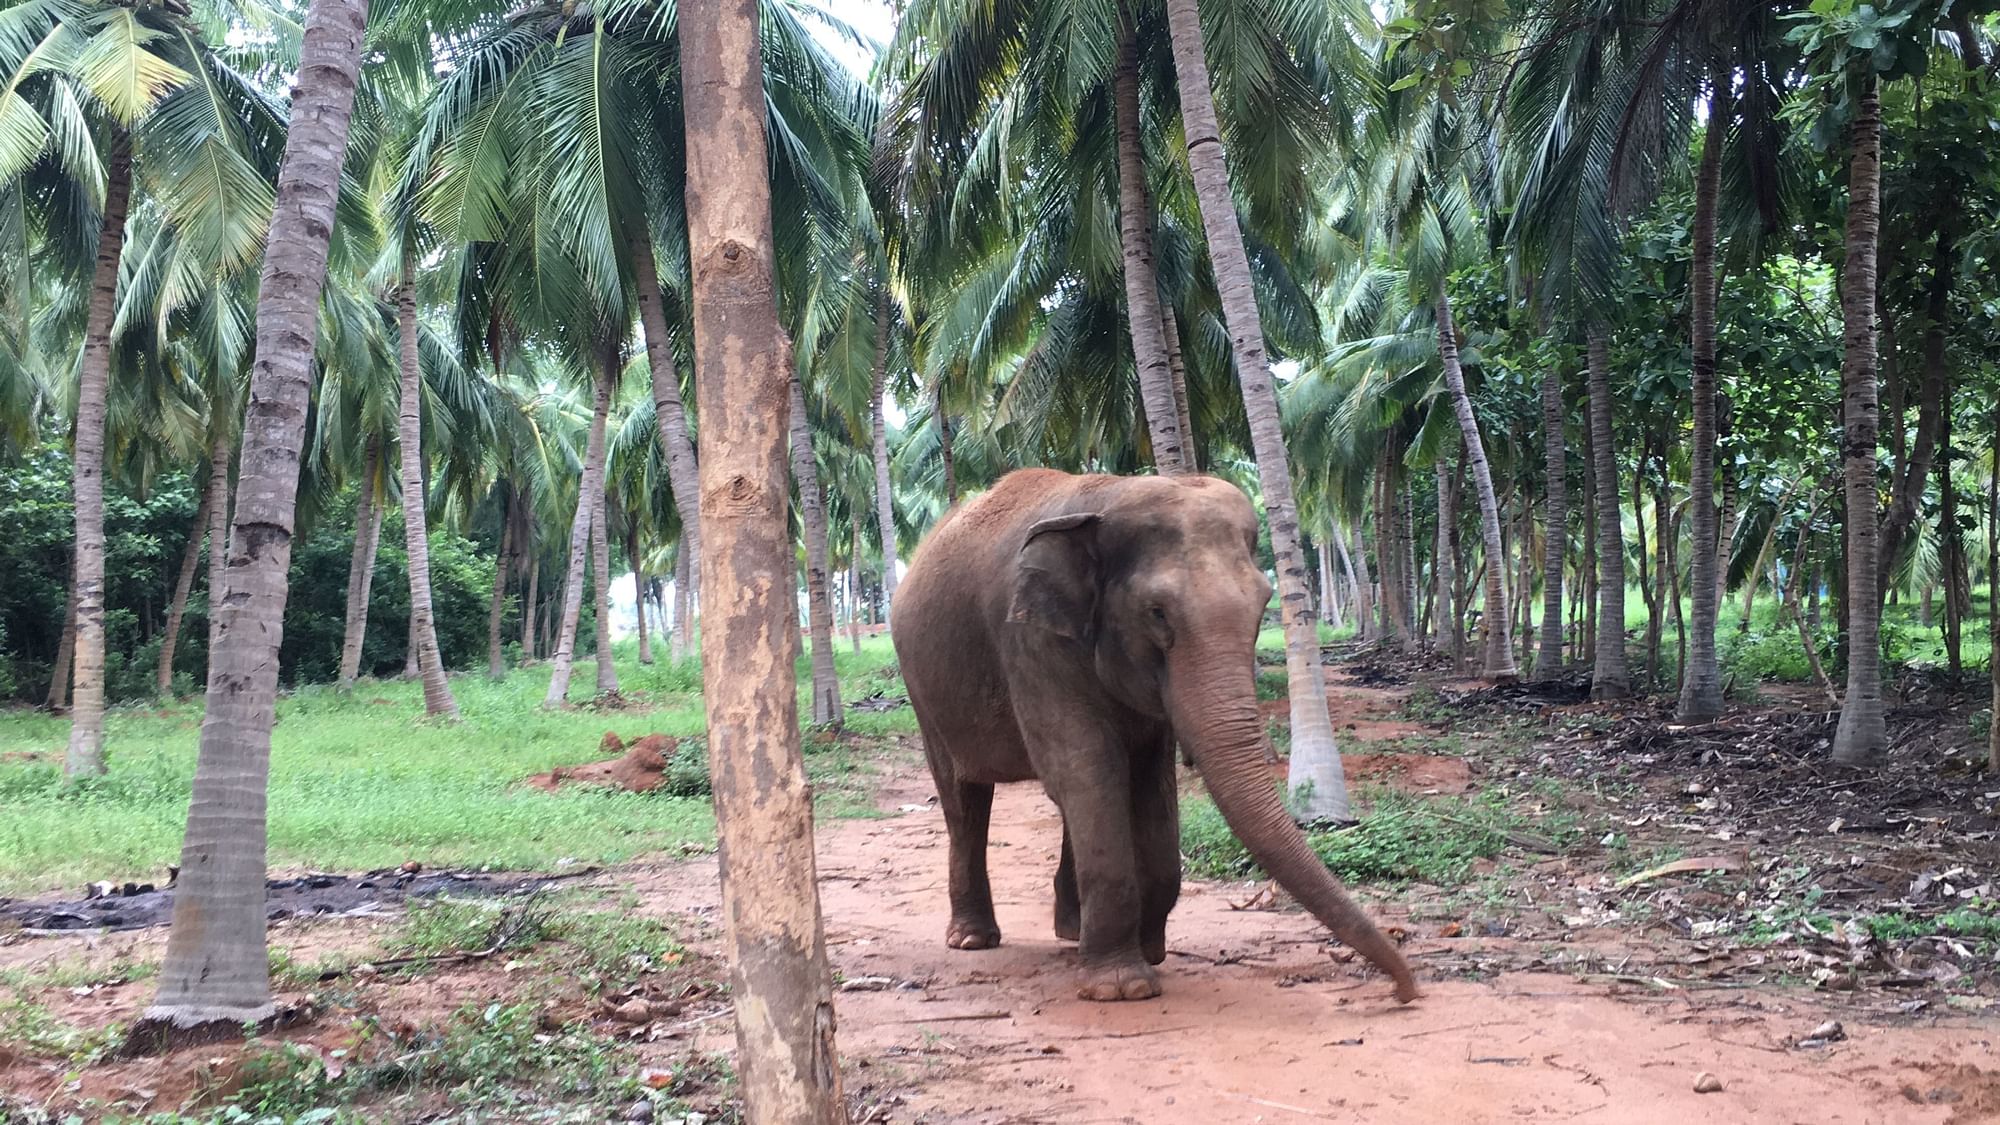 S Mathivanan has petitioned the green tribunal alleging the project violates environmental norms and eat into reserve forests of Sanamavu, an elephant corridor. Representative image.